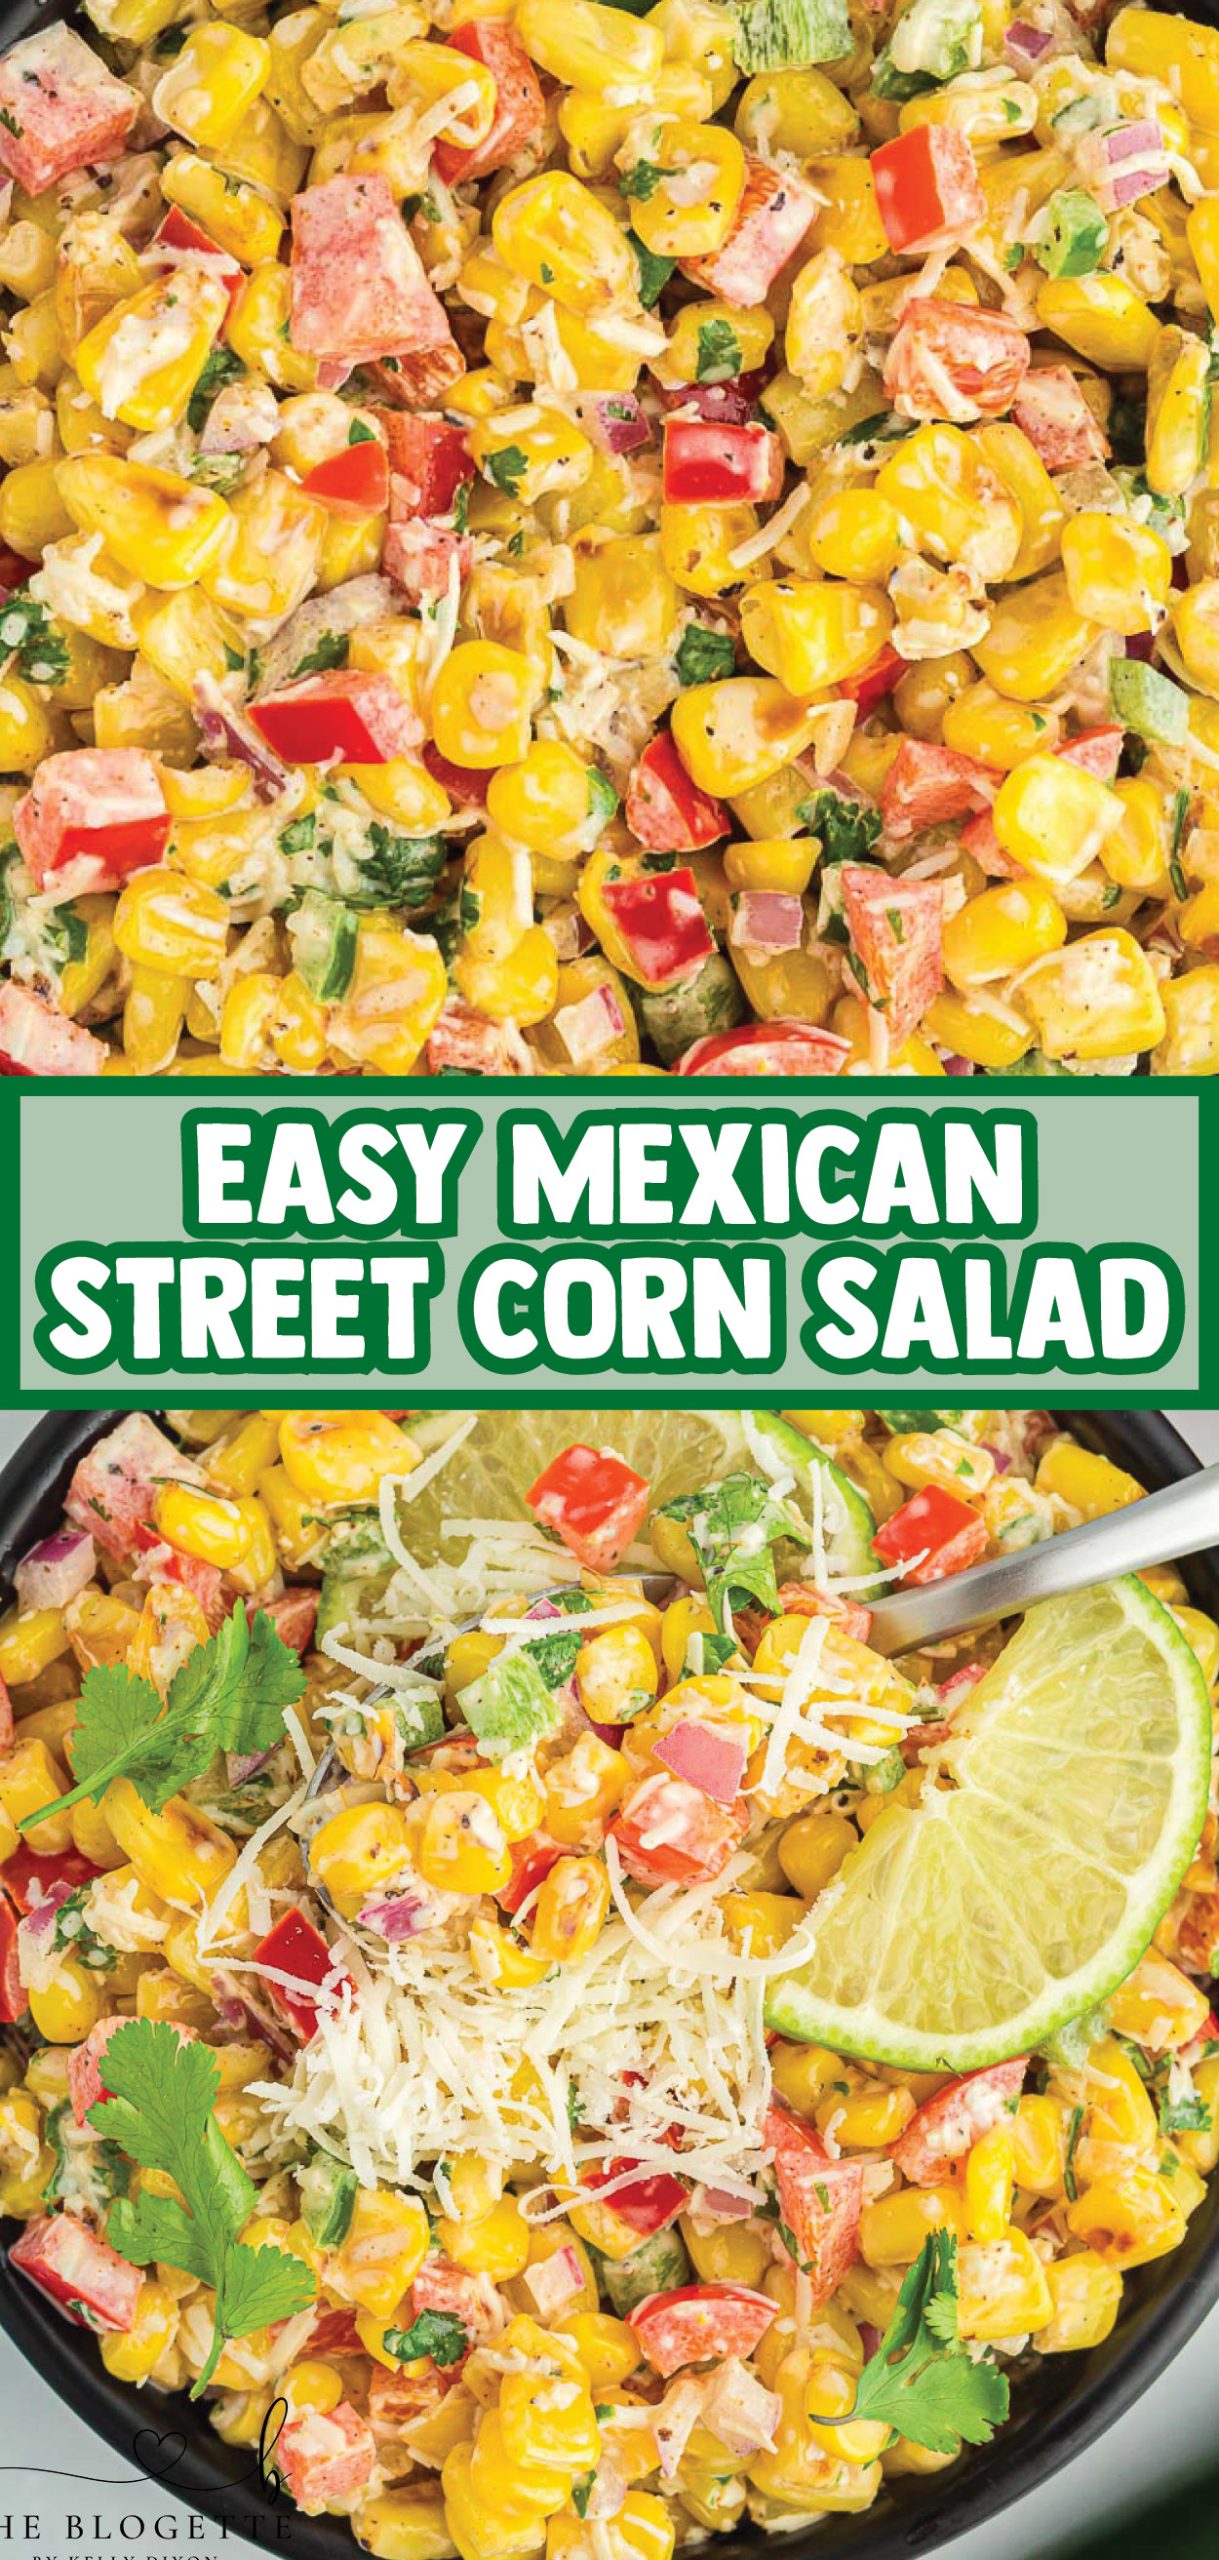 Mexican Street Corn Salad, also known as esquites, is an easy and creamy side dish or appetizer packed with flavor! This dish is a take on traditional elote, or grilled Mexican corn on the cob. This corn recipe is incredibly delicious!